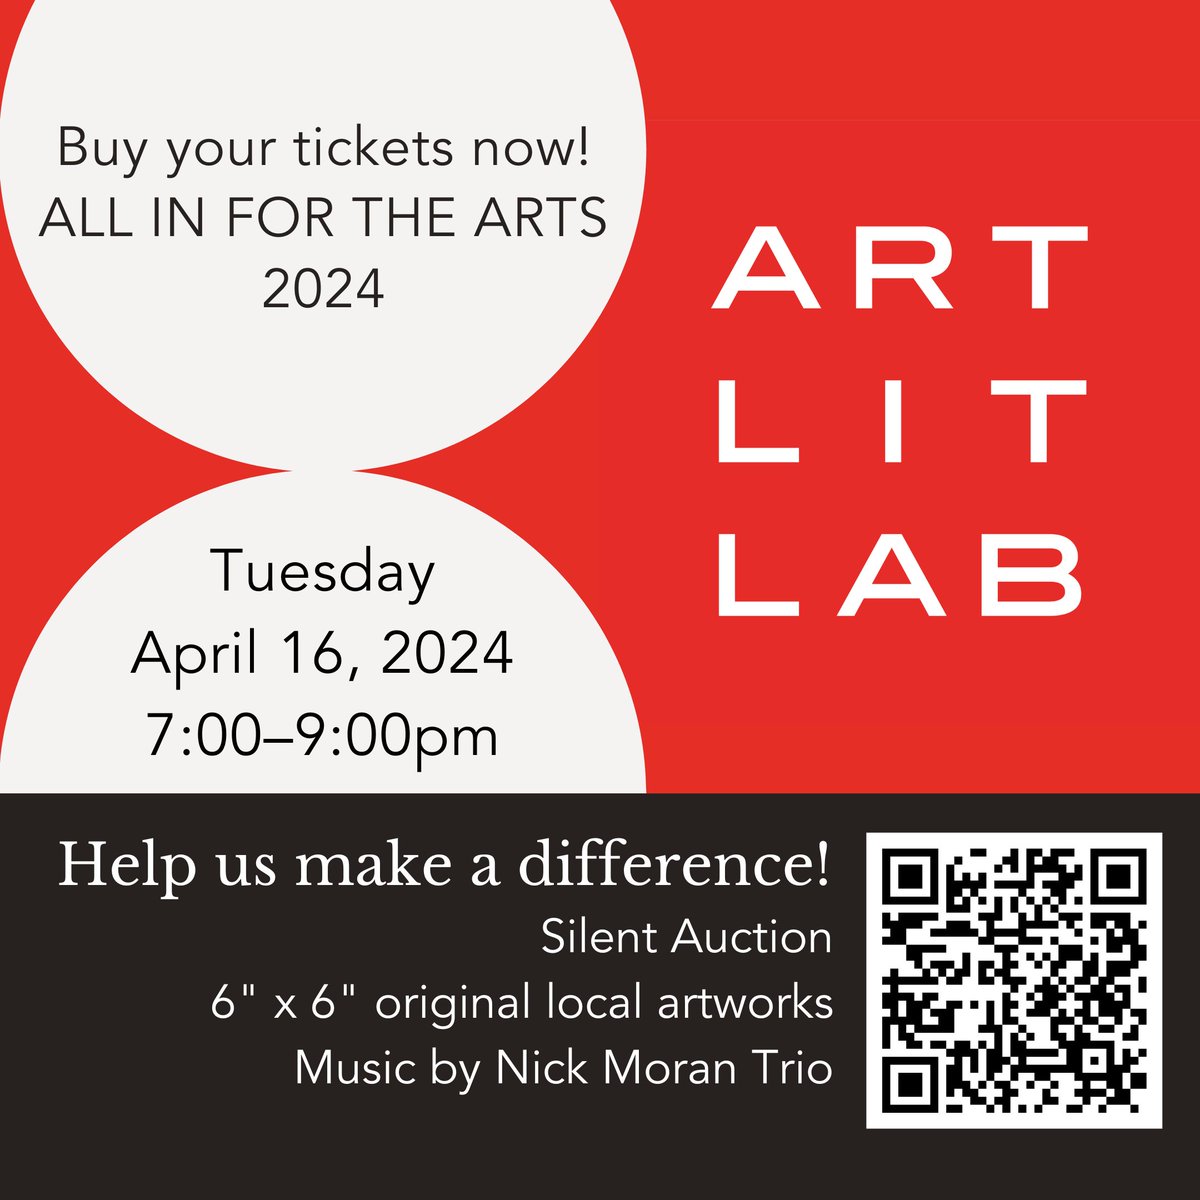 One week from tonight! Join us for ALL IN FOR THE ARTS 2024, a fundraiser to support our low-cost and free programming, Tues Apr 16, 7pm–9pm. loom.ly/2J5wgfA